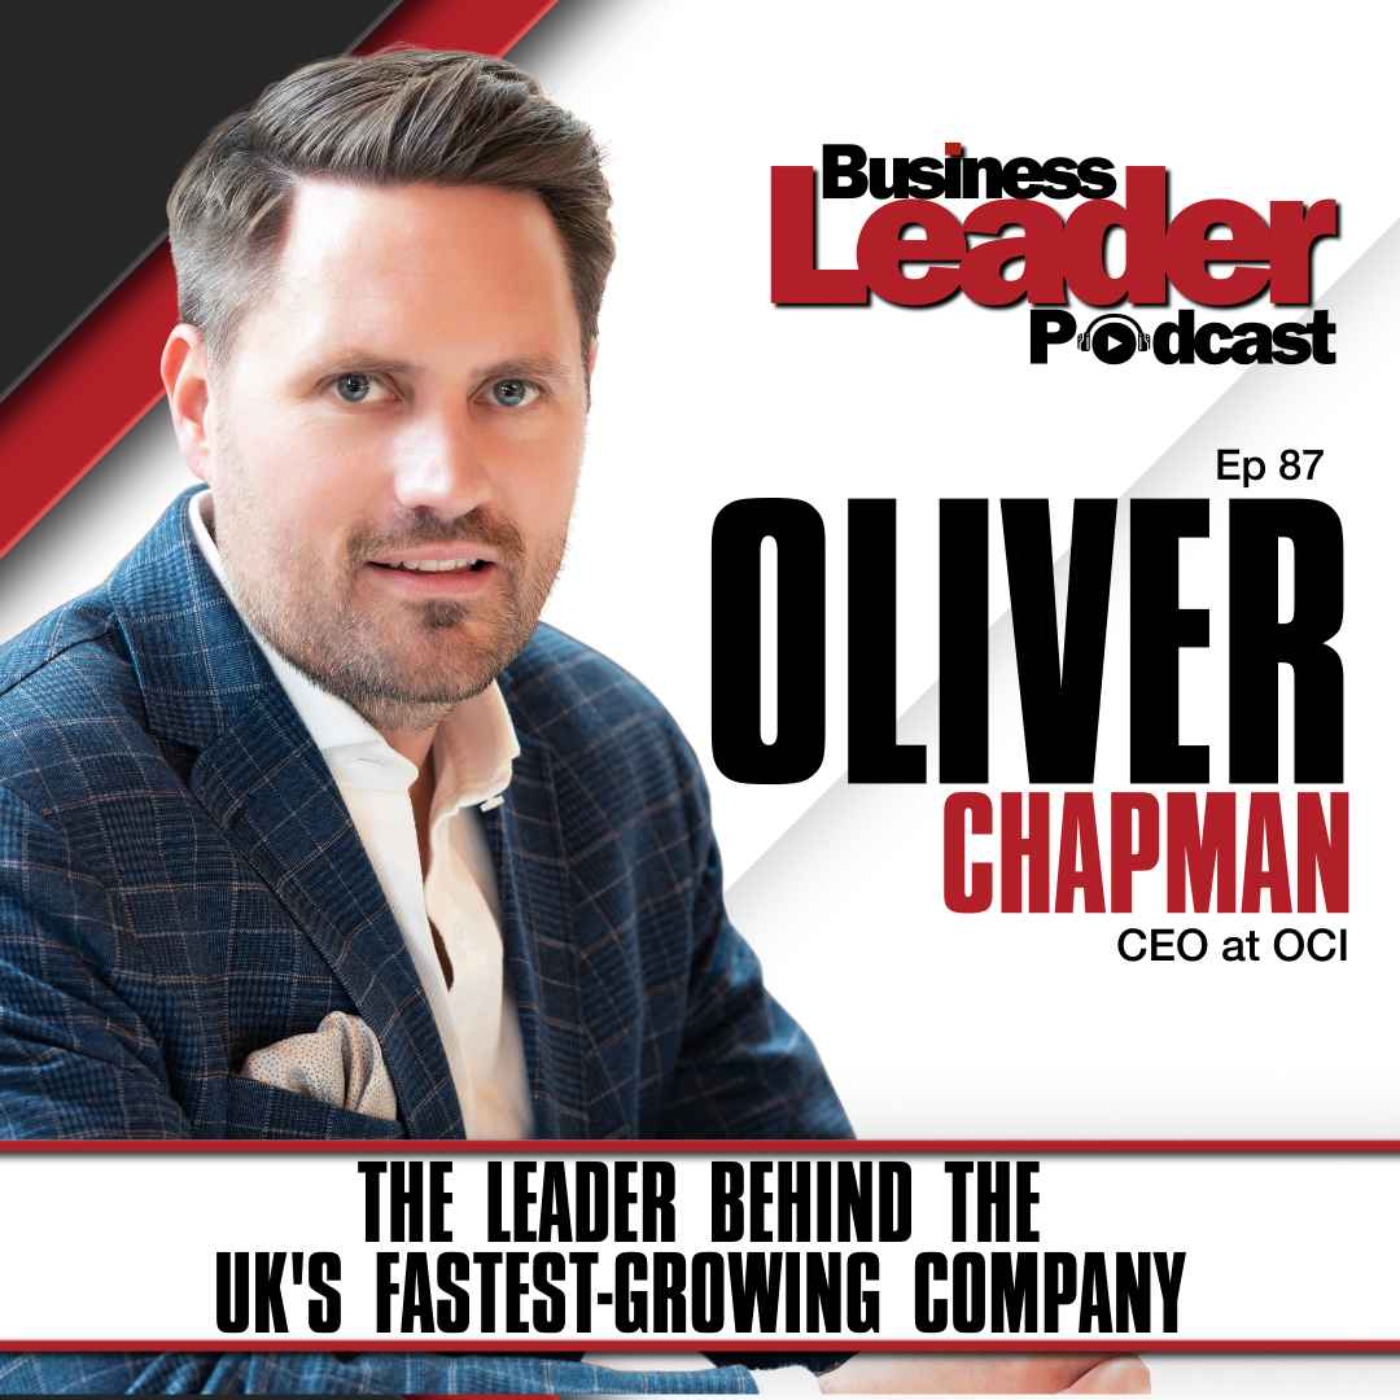 Oliver Chapman: The leader behind the UK's fastest-growing company